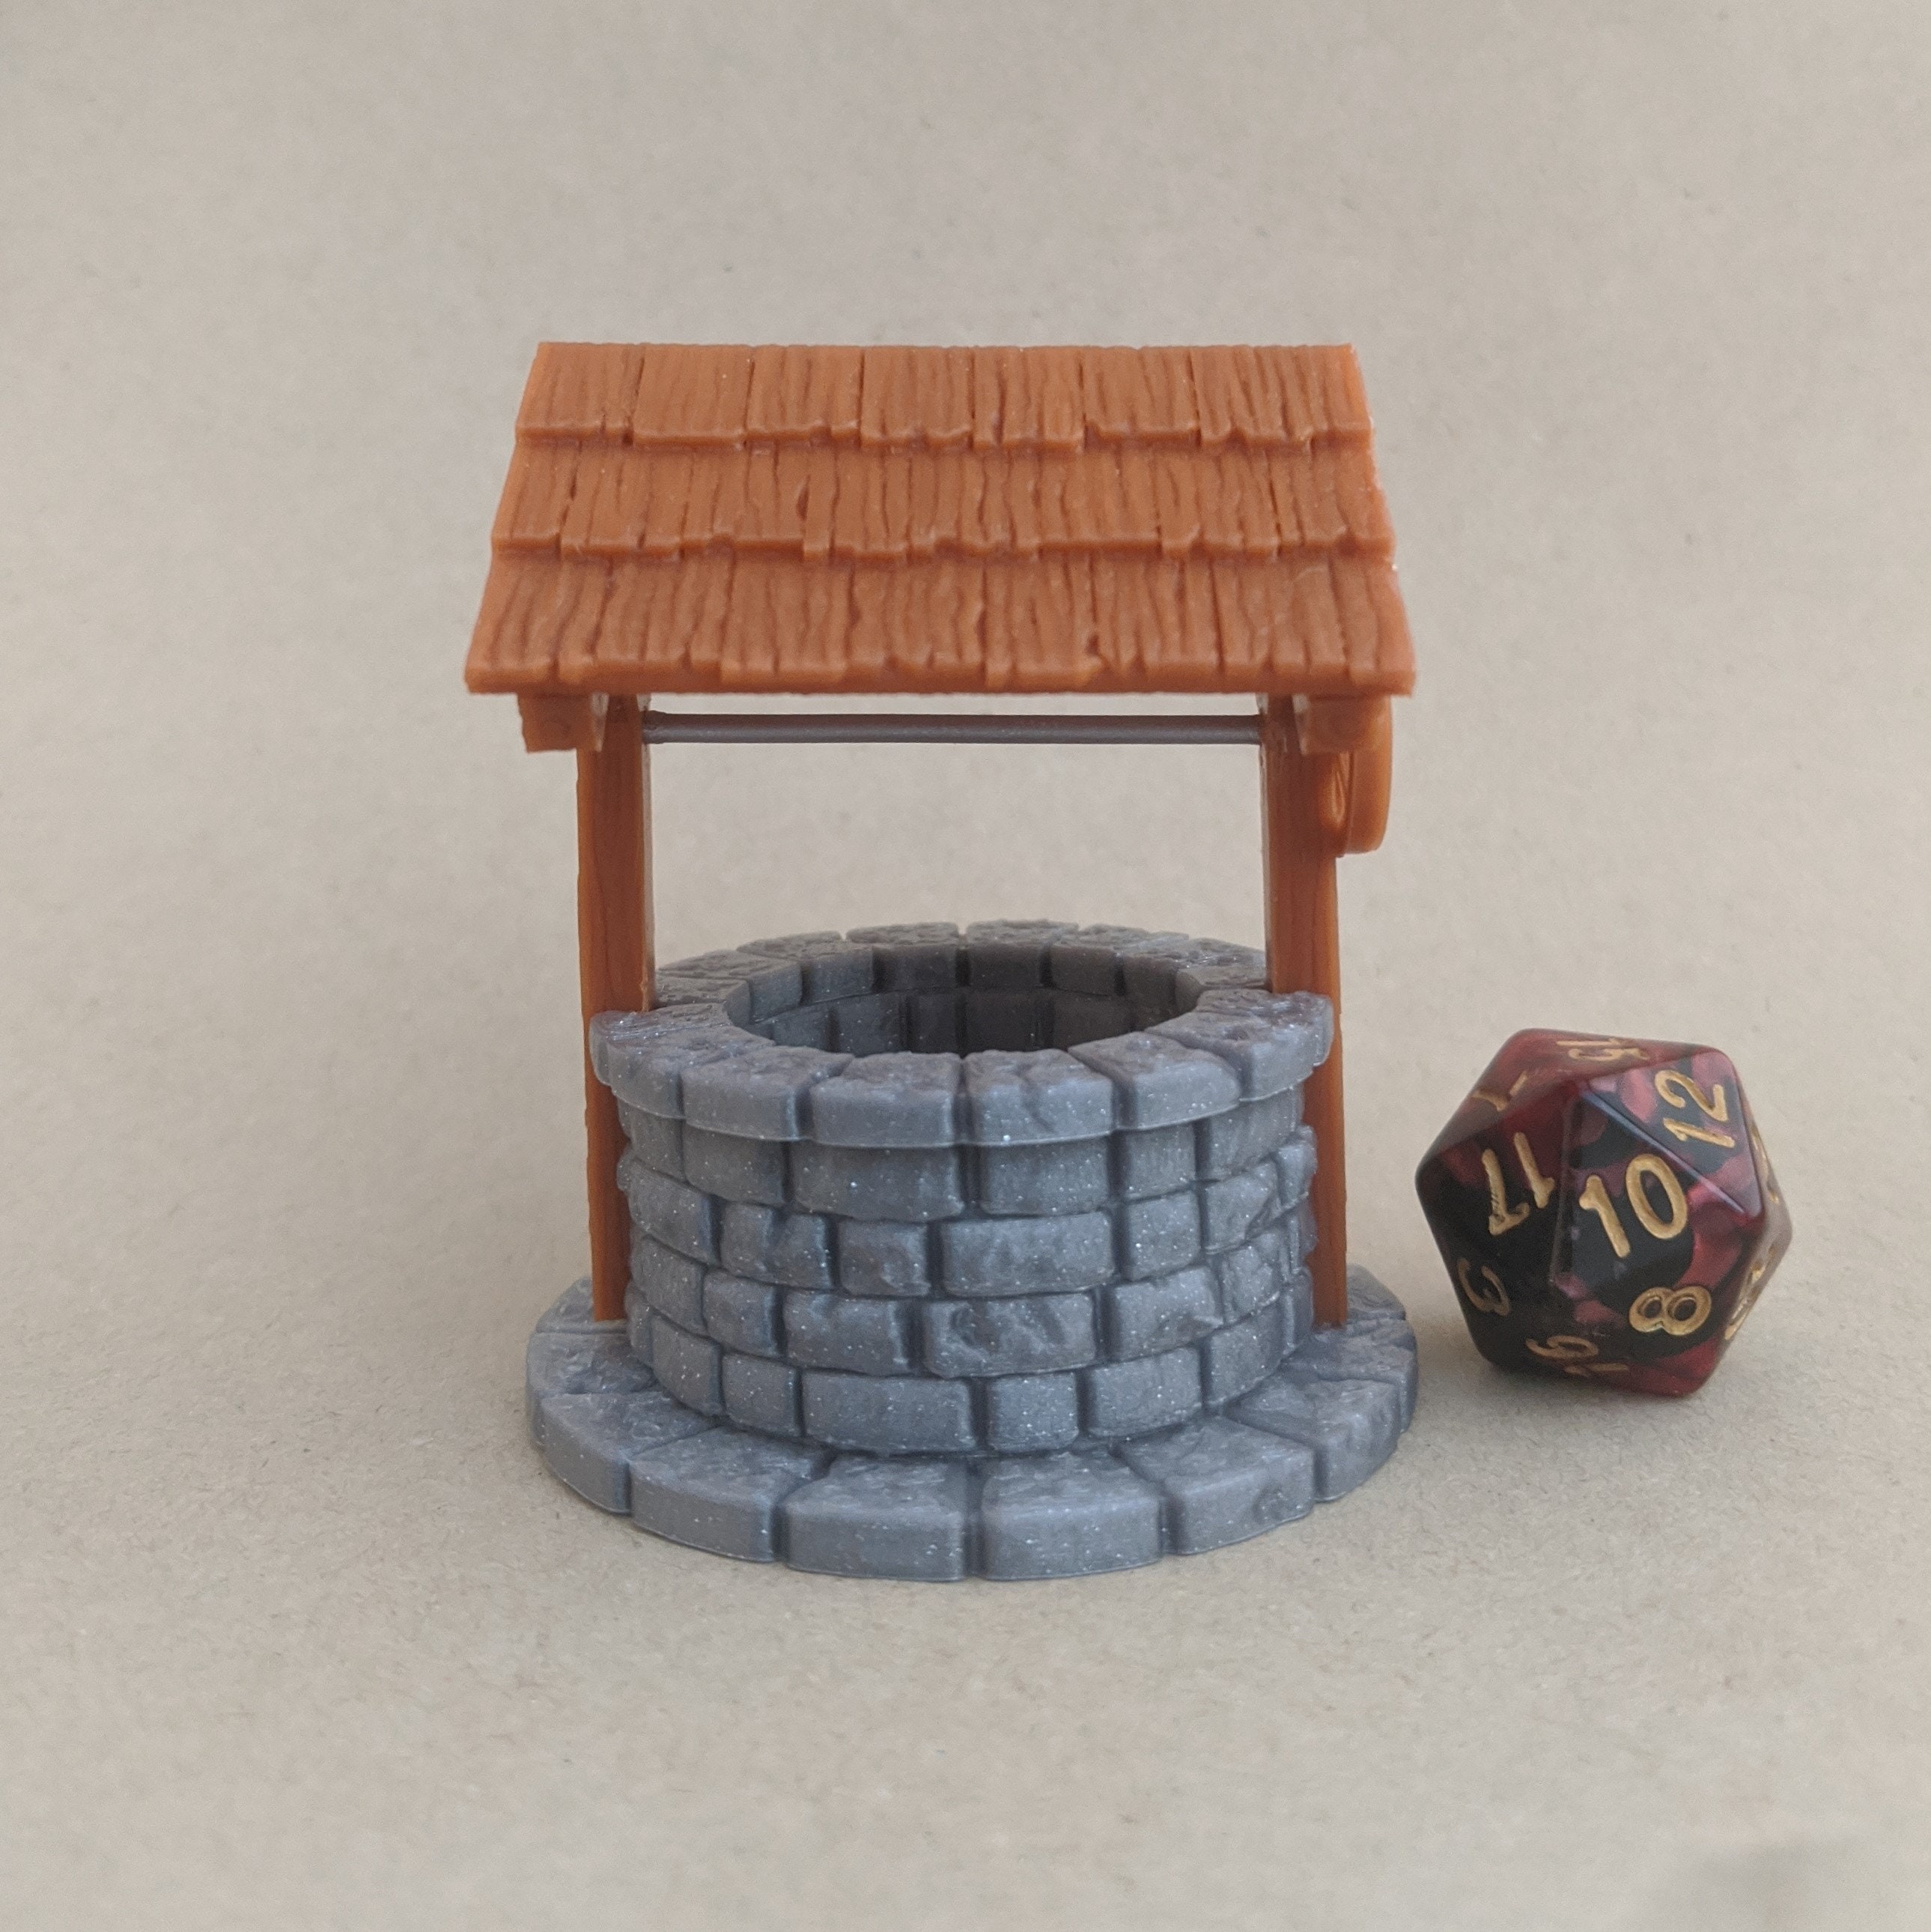 Well Miniature Dungeons and Dragons DnD Tabletop Gaming | Etsy